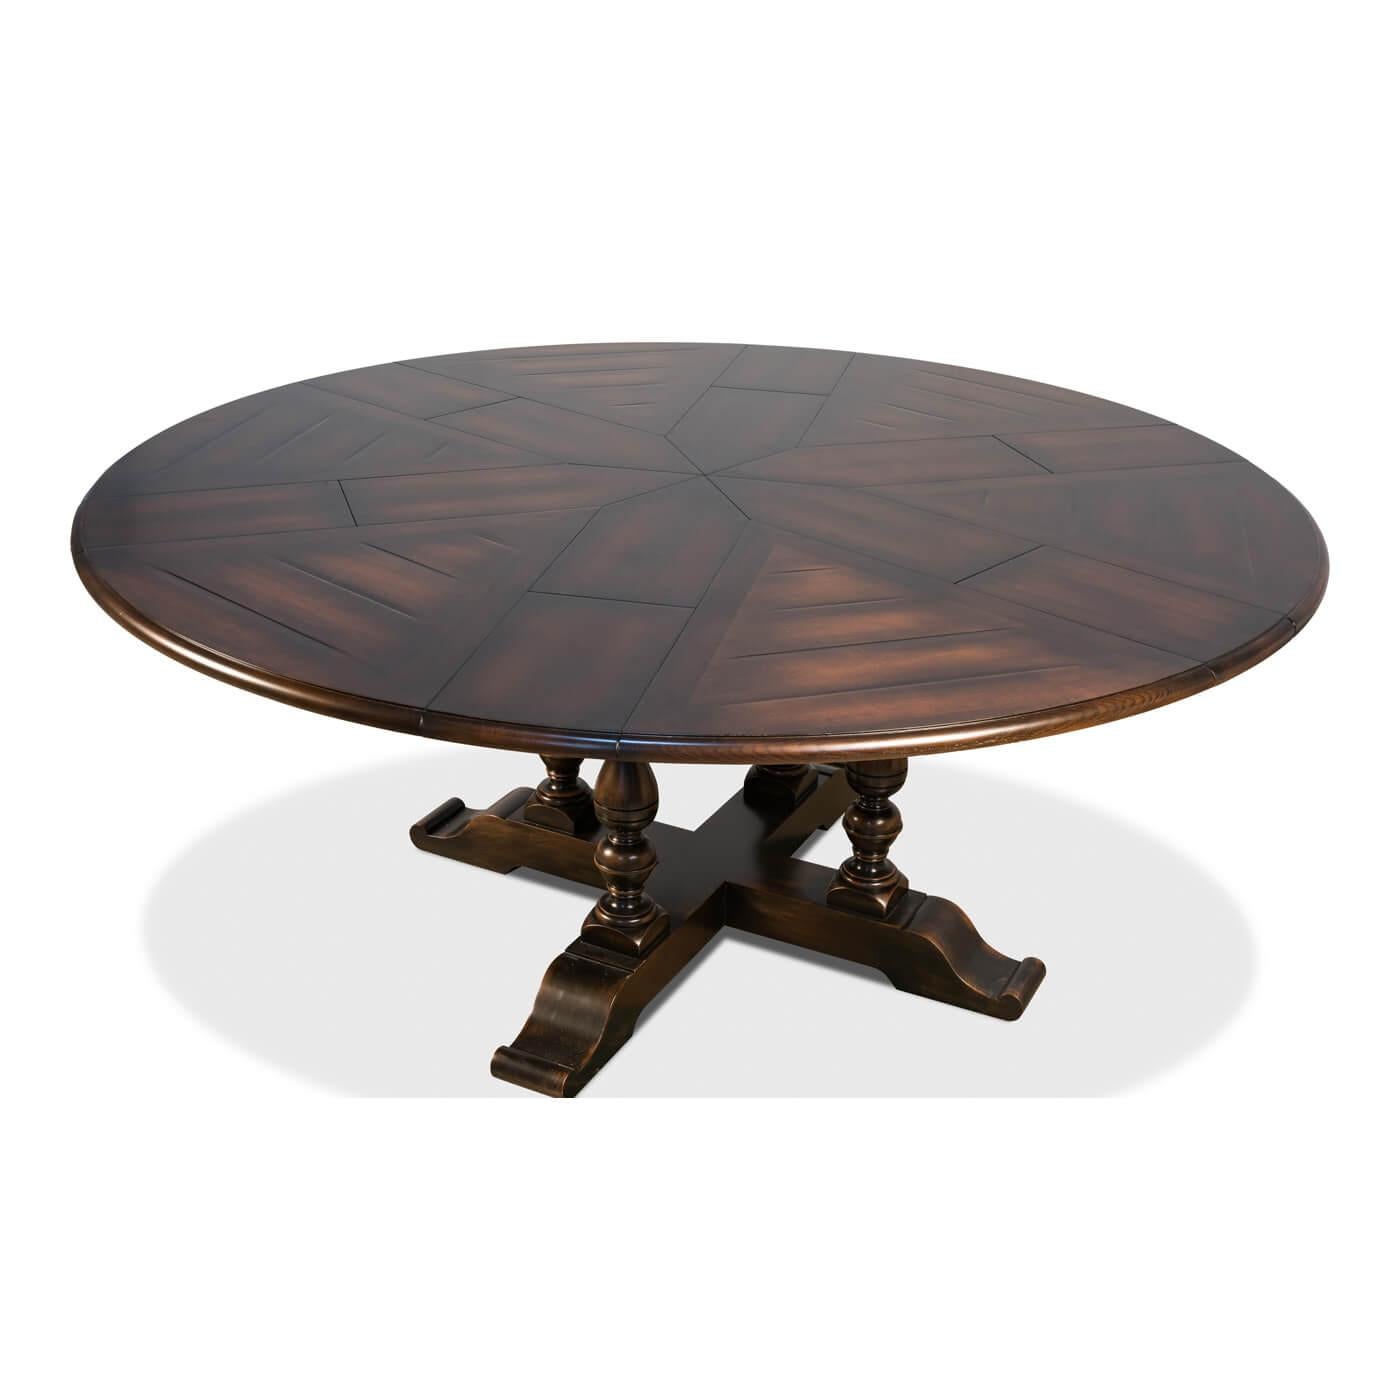 Early English style round extension dining table. A beautiful and versatile table that can expand up to 100